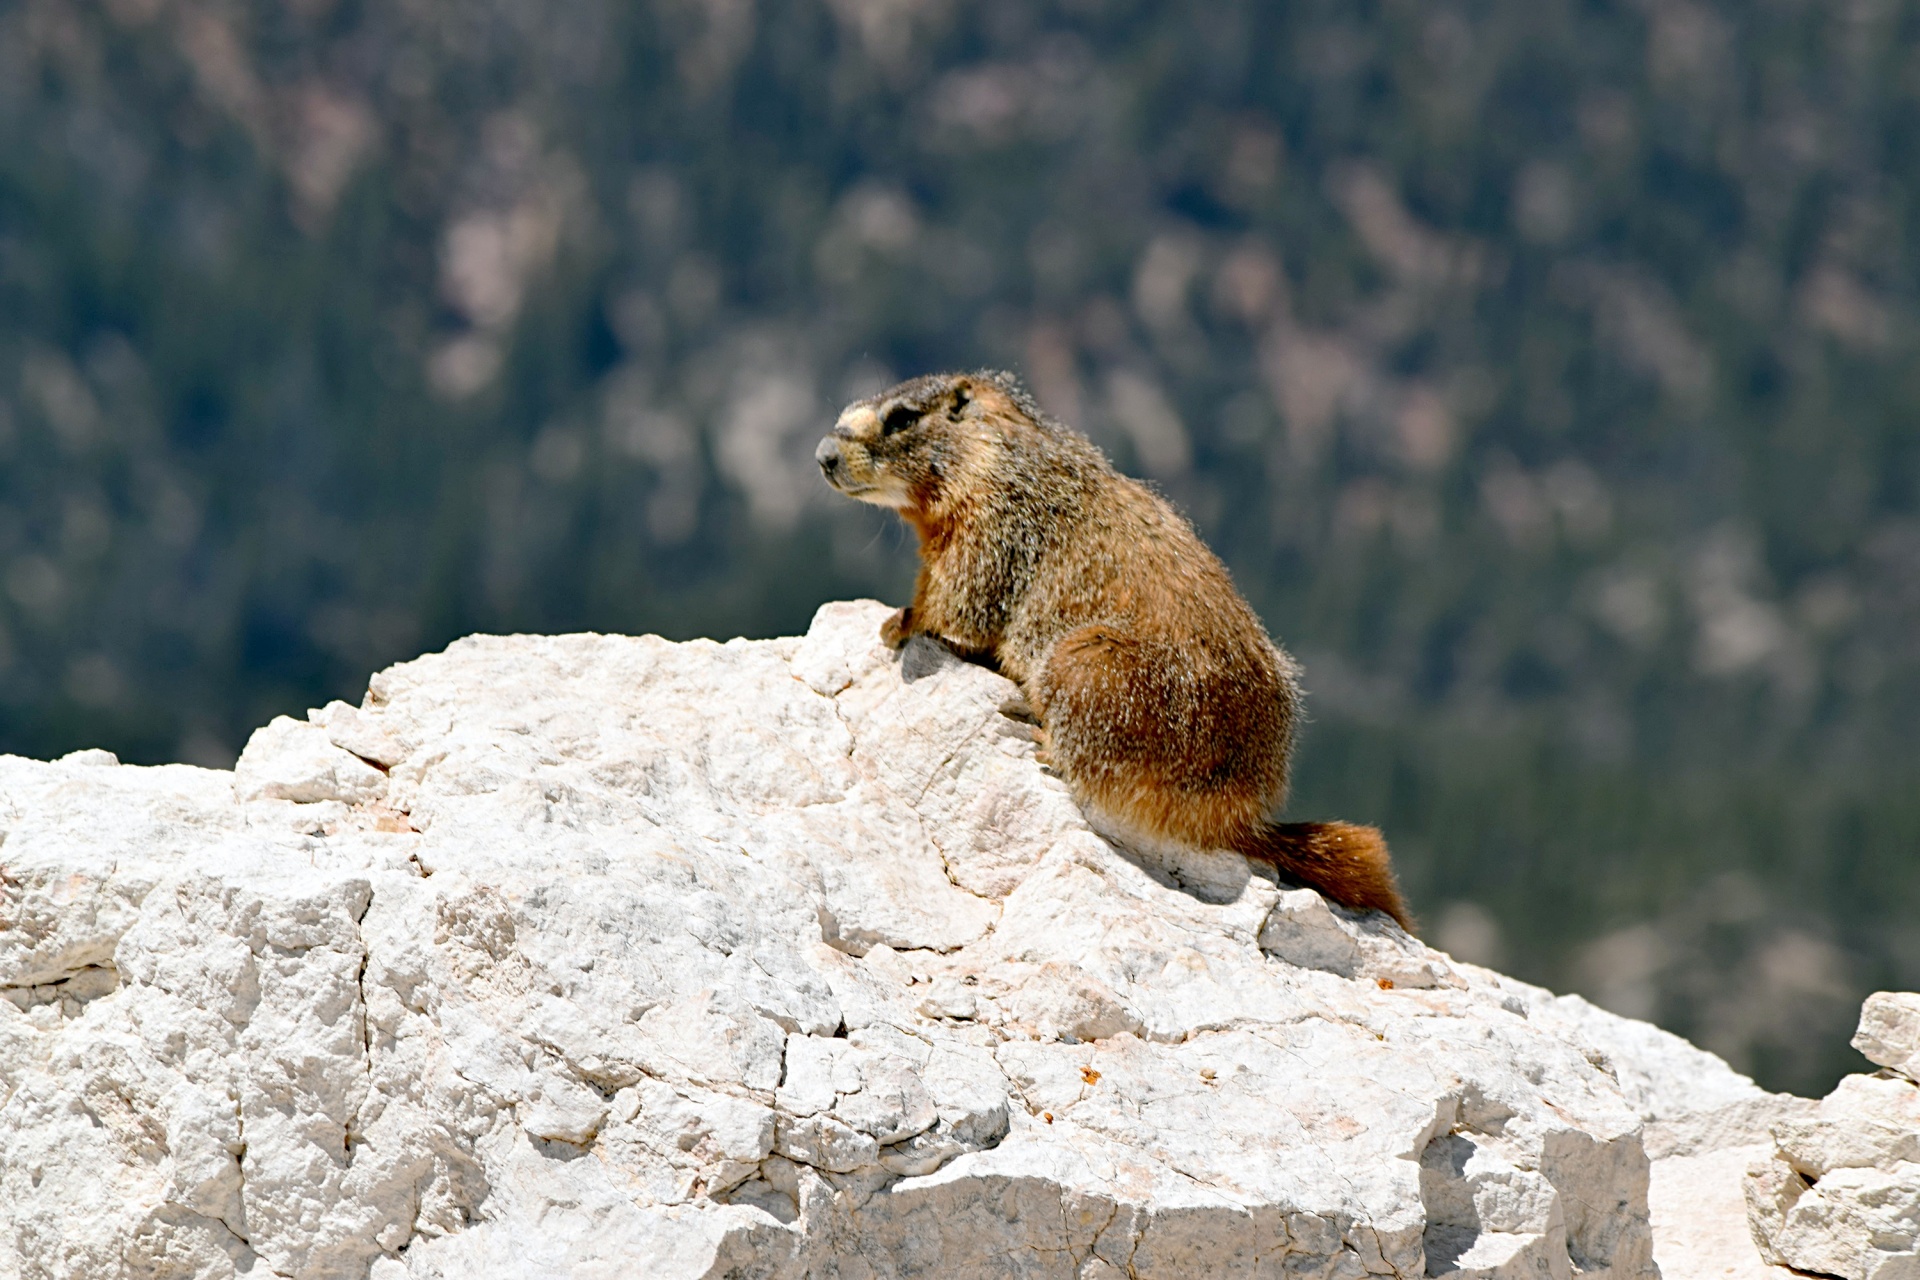 marmot yellow bellied rodent free photo